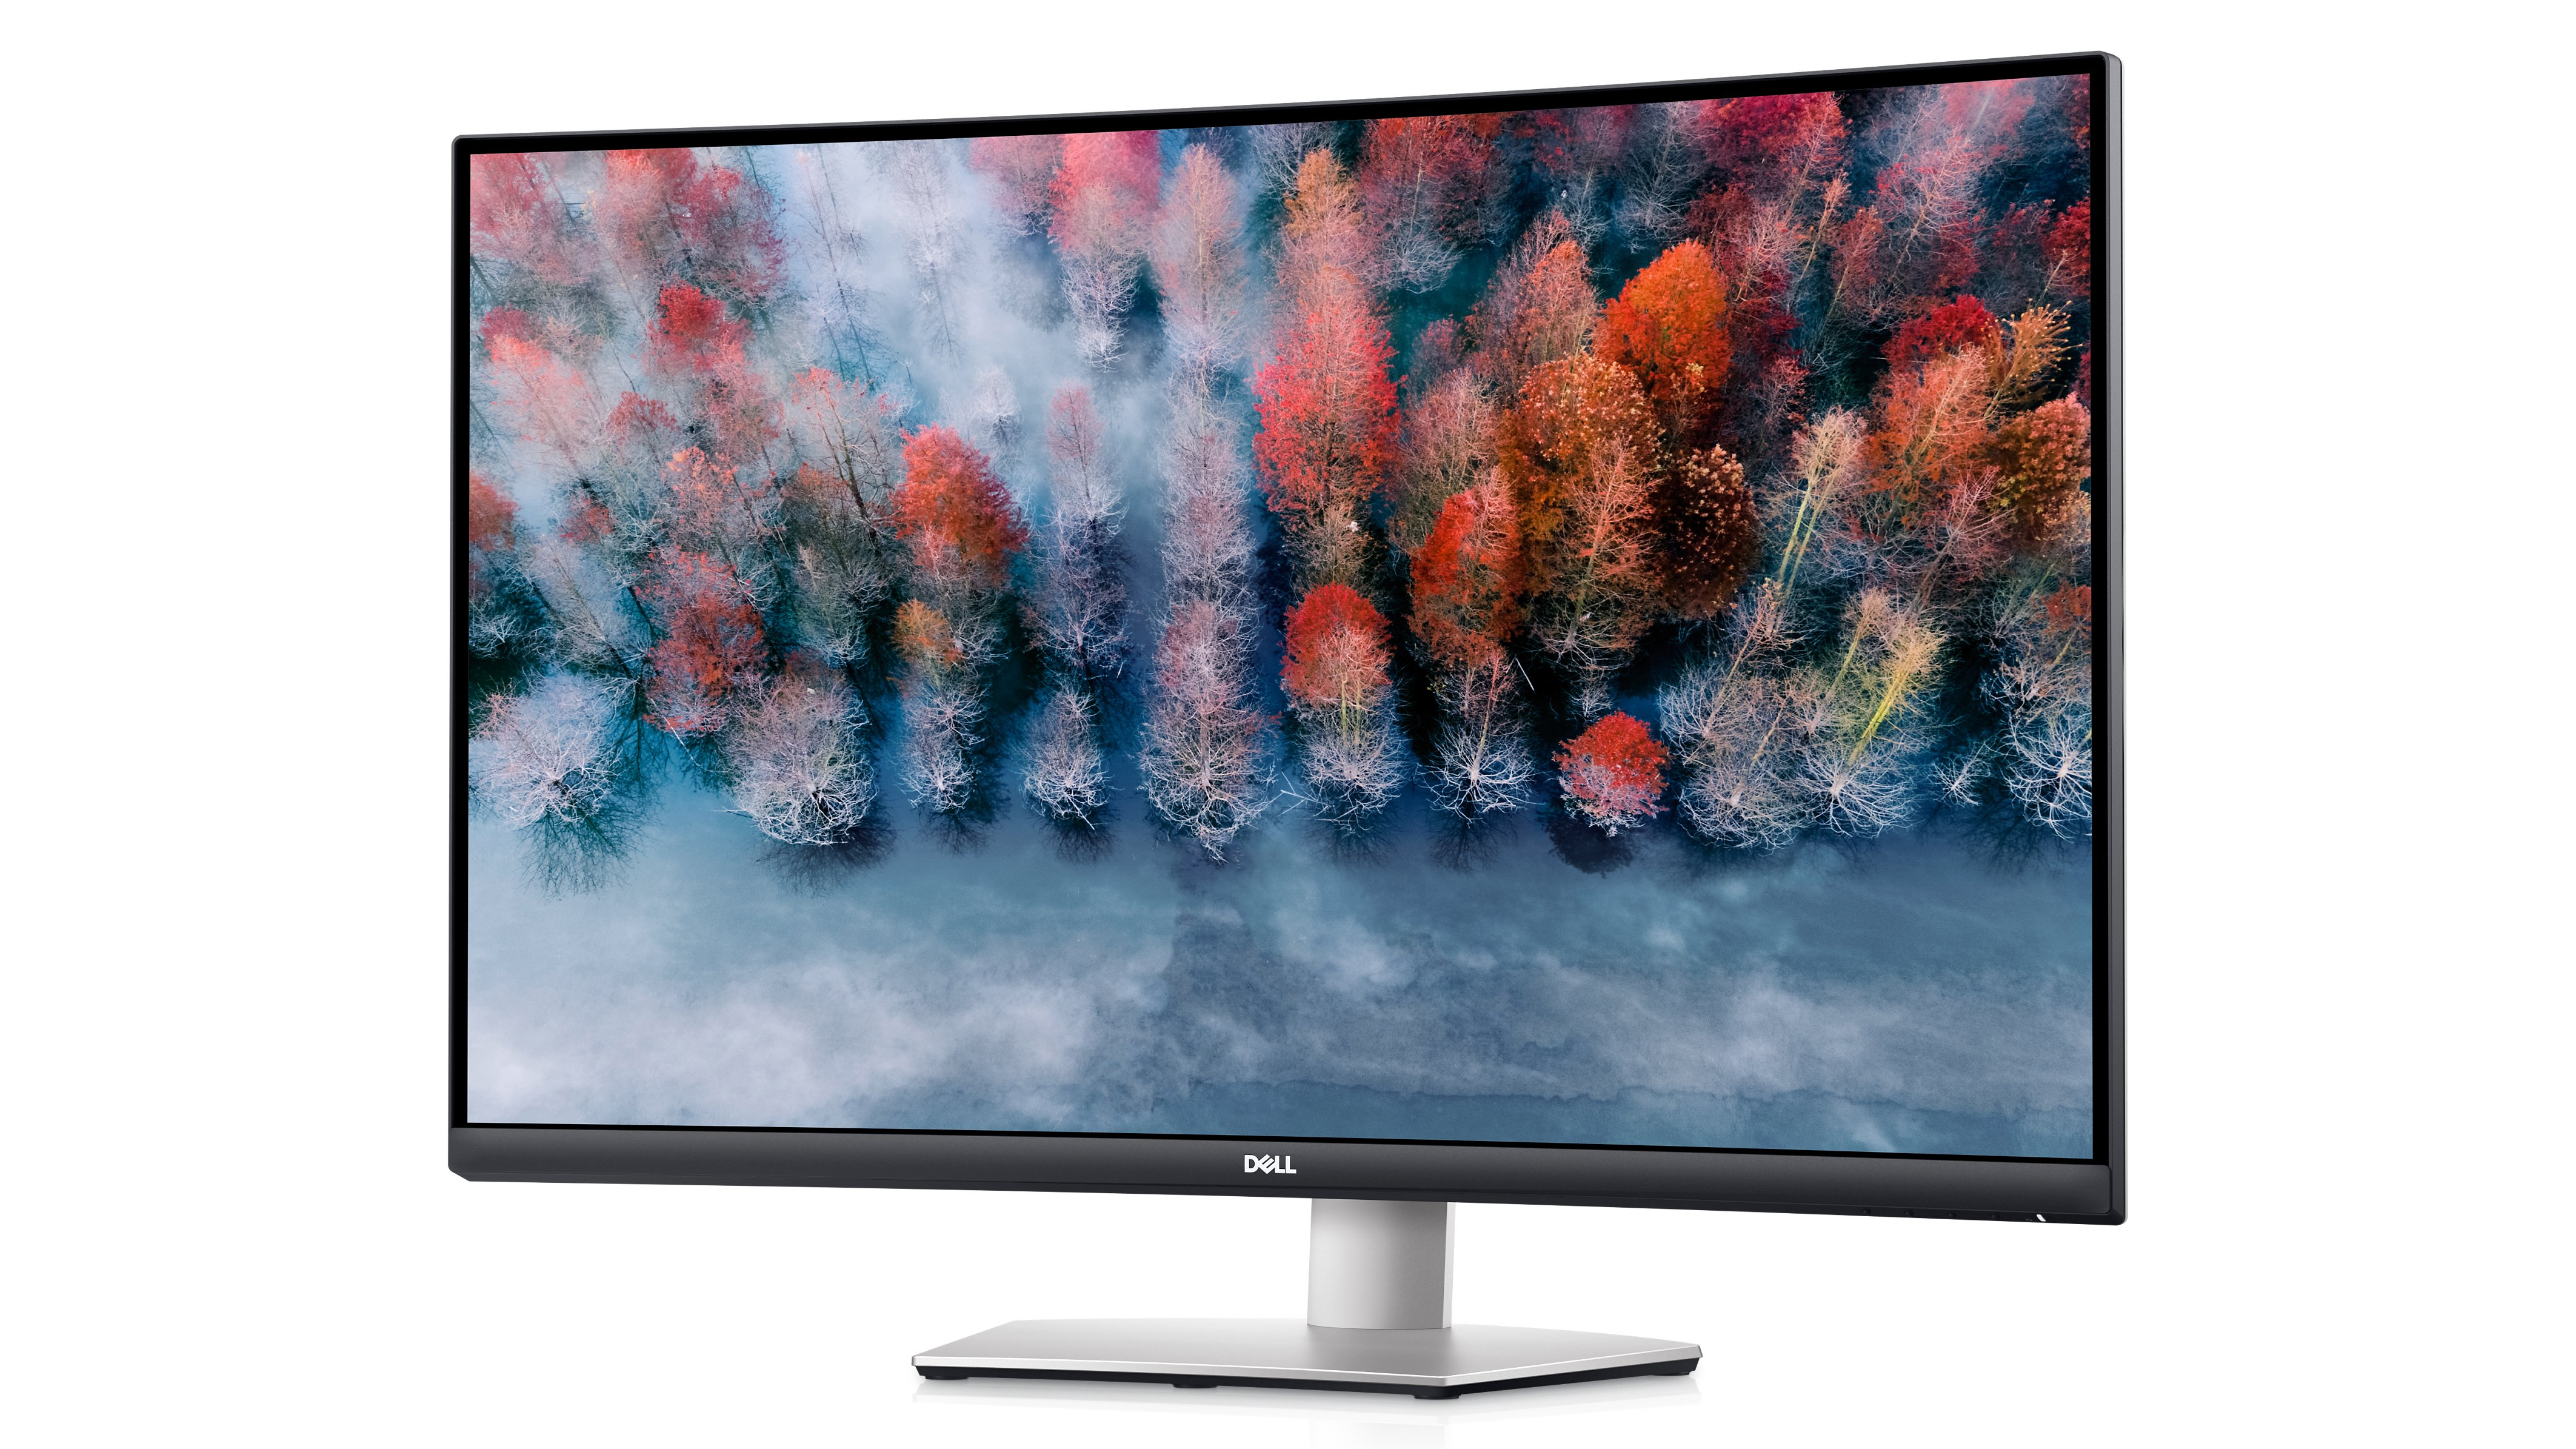 Dell 4K S3221QS Curved Monitor at an angle on a white background